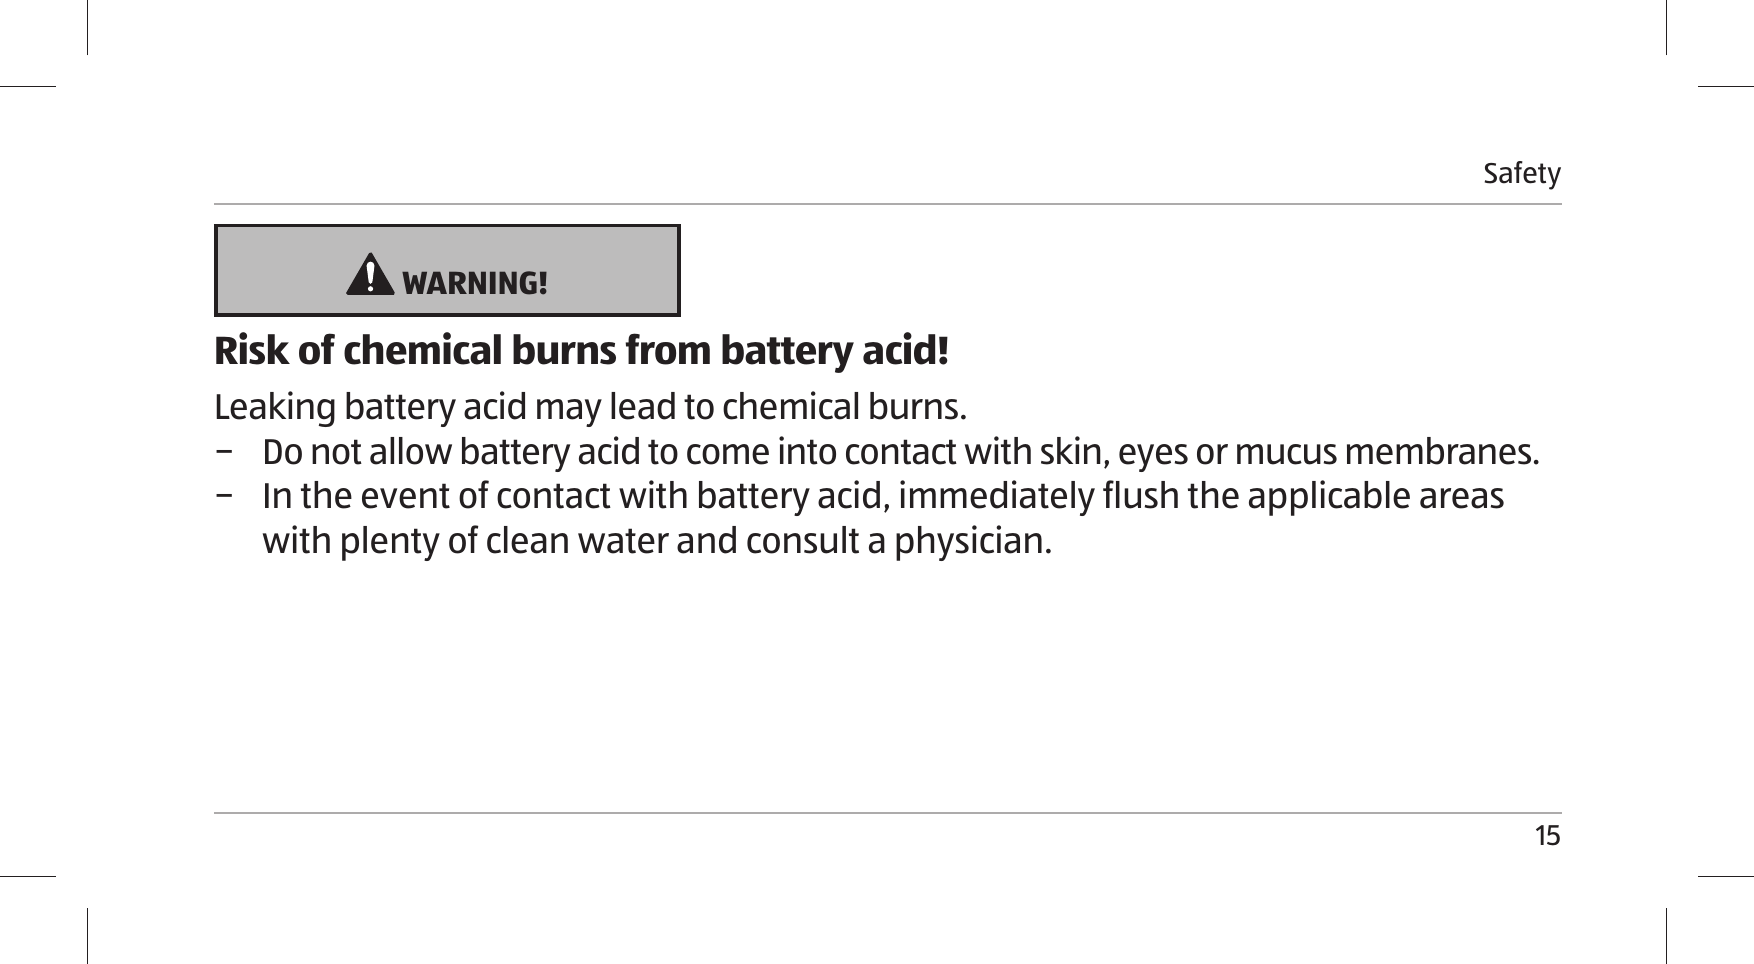 Safety15 WARNING!Risk of chemical burns from battery acid!Leaking battery acid may lead to chemical burns. − Do not allow battery acid to come into contact with skin, eyes or mucus membranes. − In the event of contact with battery acid, immediately flush the applicable areas with plenty of clean water and consult a physician.